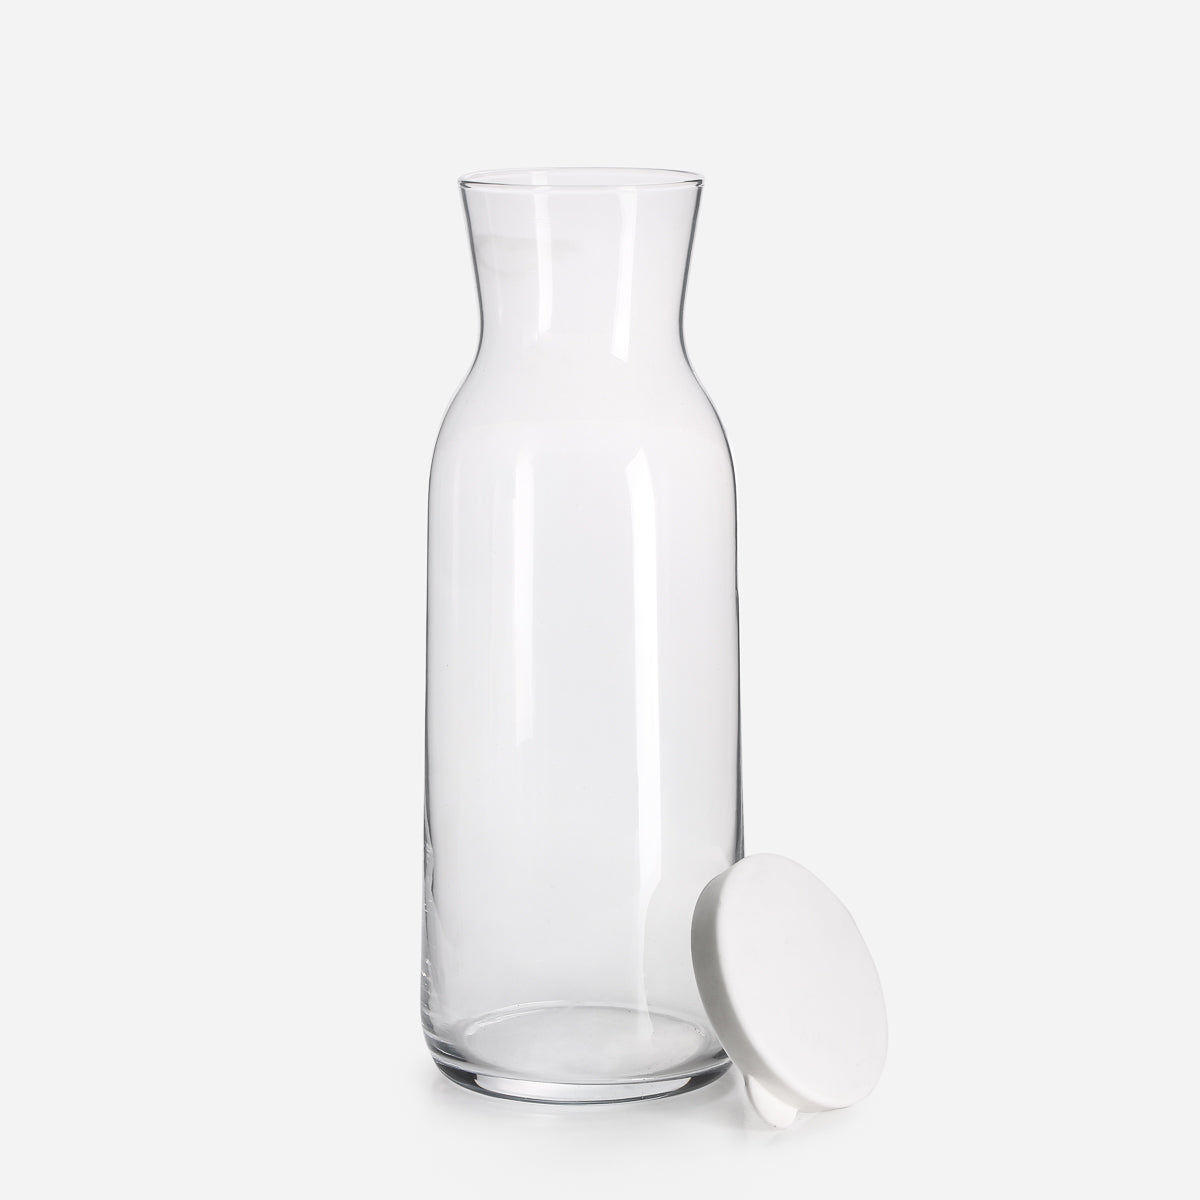 LAV Fonte Clear Glass Pitcher Carafe with Lid, 40 oz – LAV-US